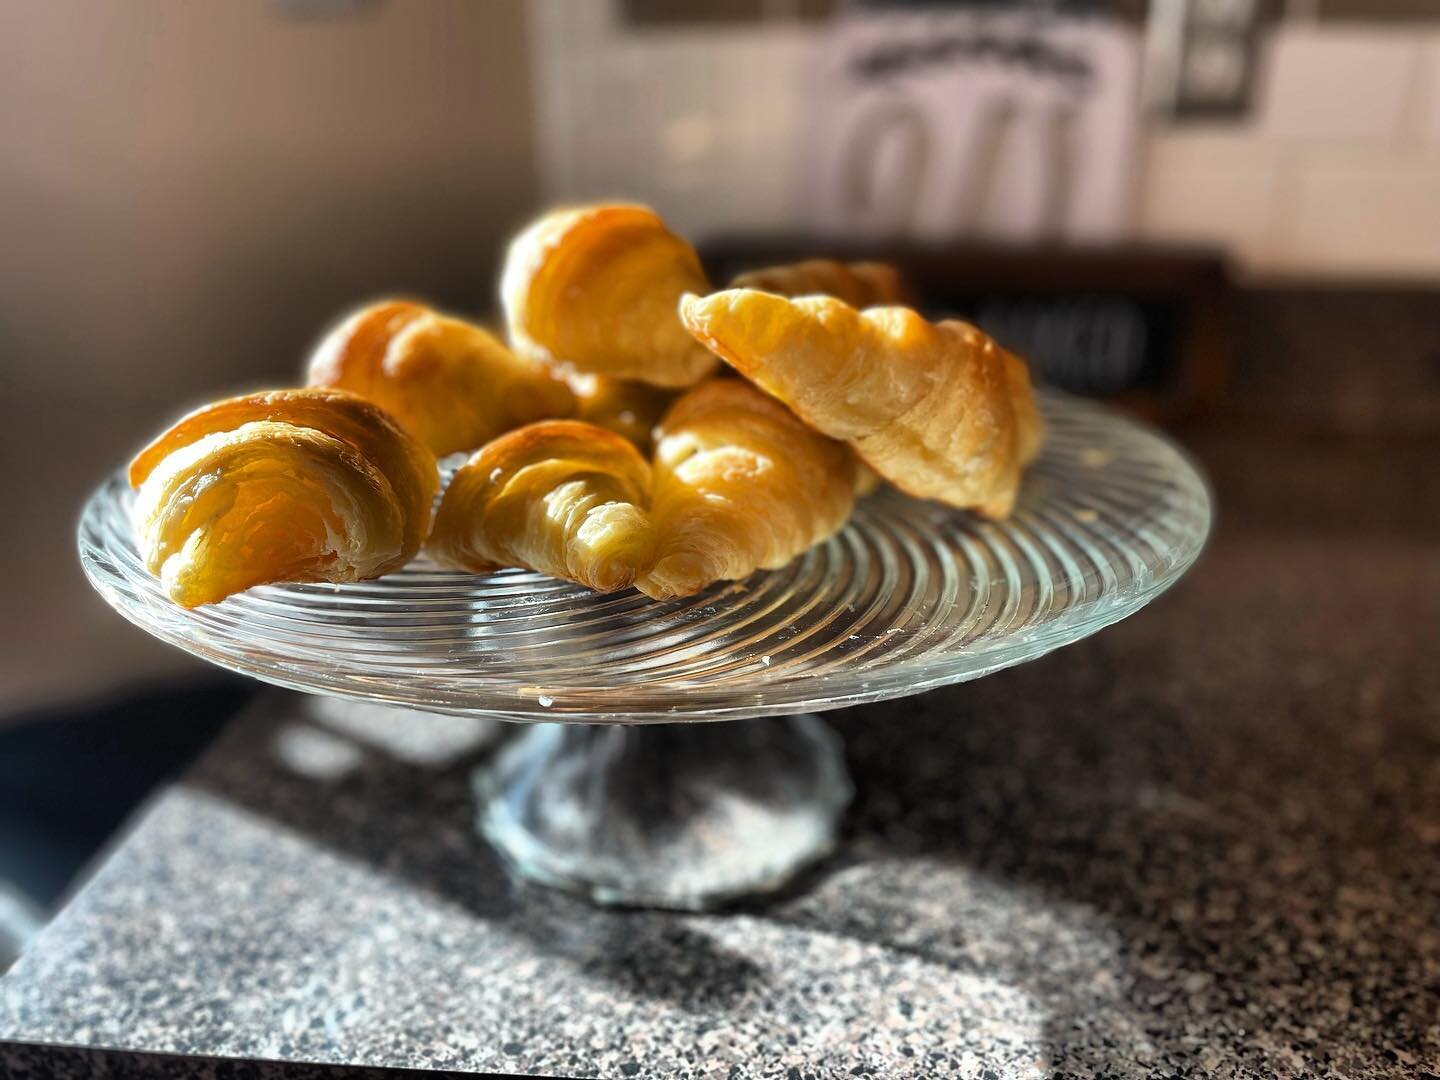 Sourdough Croissants 🥐 

Always working towards that perfect lamination

Still accepting Mothers Day orders! DM me!

#tkab #topknot #homebakery #delicious #sweet #cake #chocolate #homemade #foodstagram #foodphotography #smallbusiness #dessert #foodl